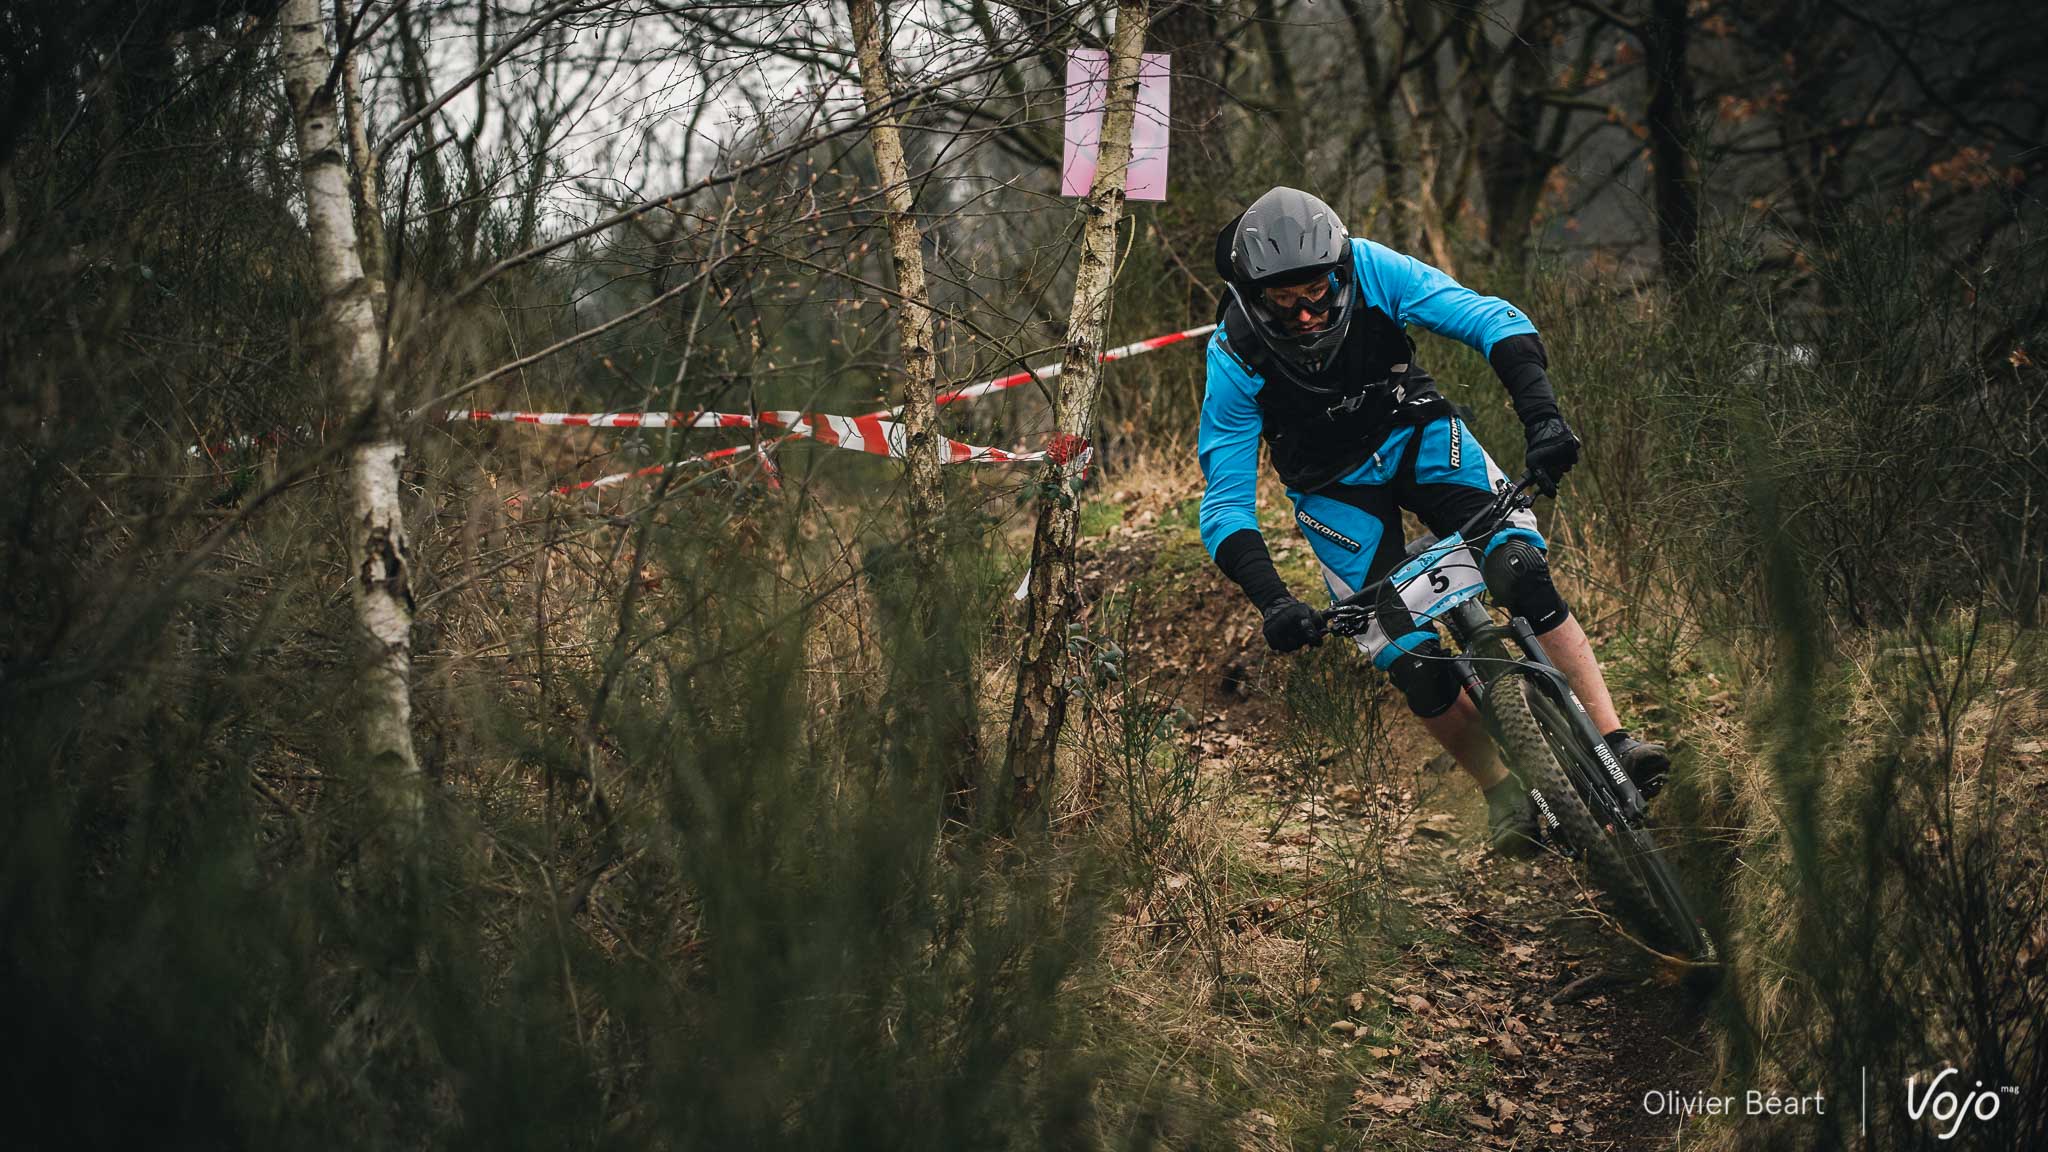 Belgian_Enduro_Cup_Chaudfontaine_2016_Copyright_OBeart_Vojomag-31